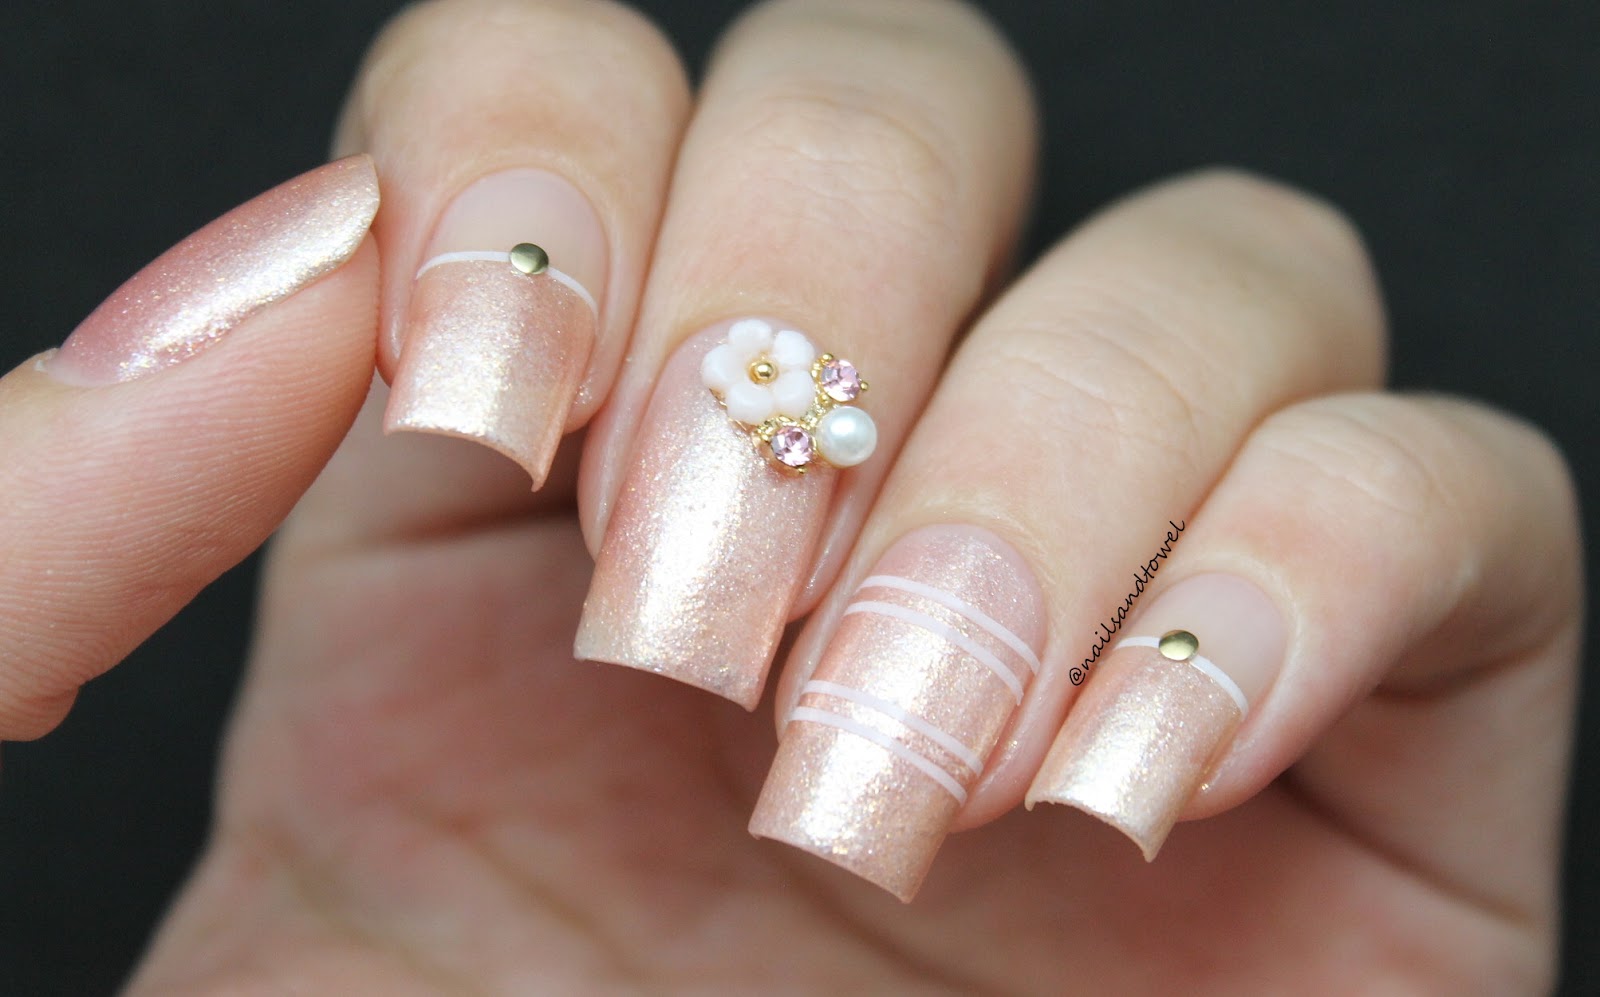 Romantic Nail Designs for Weddings - wide 3